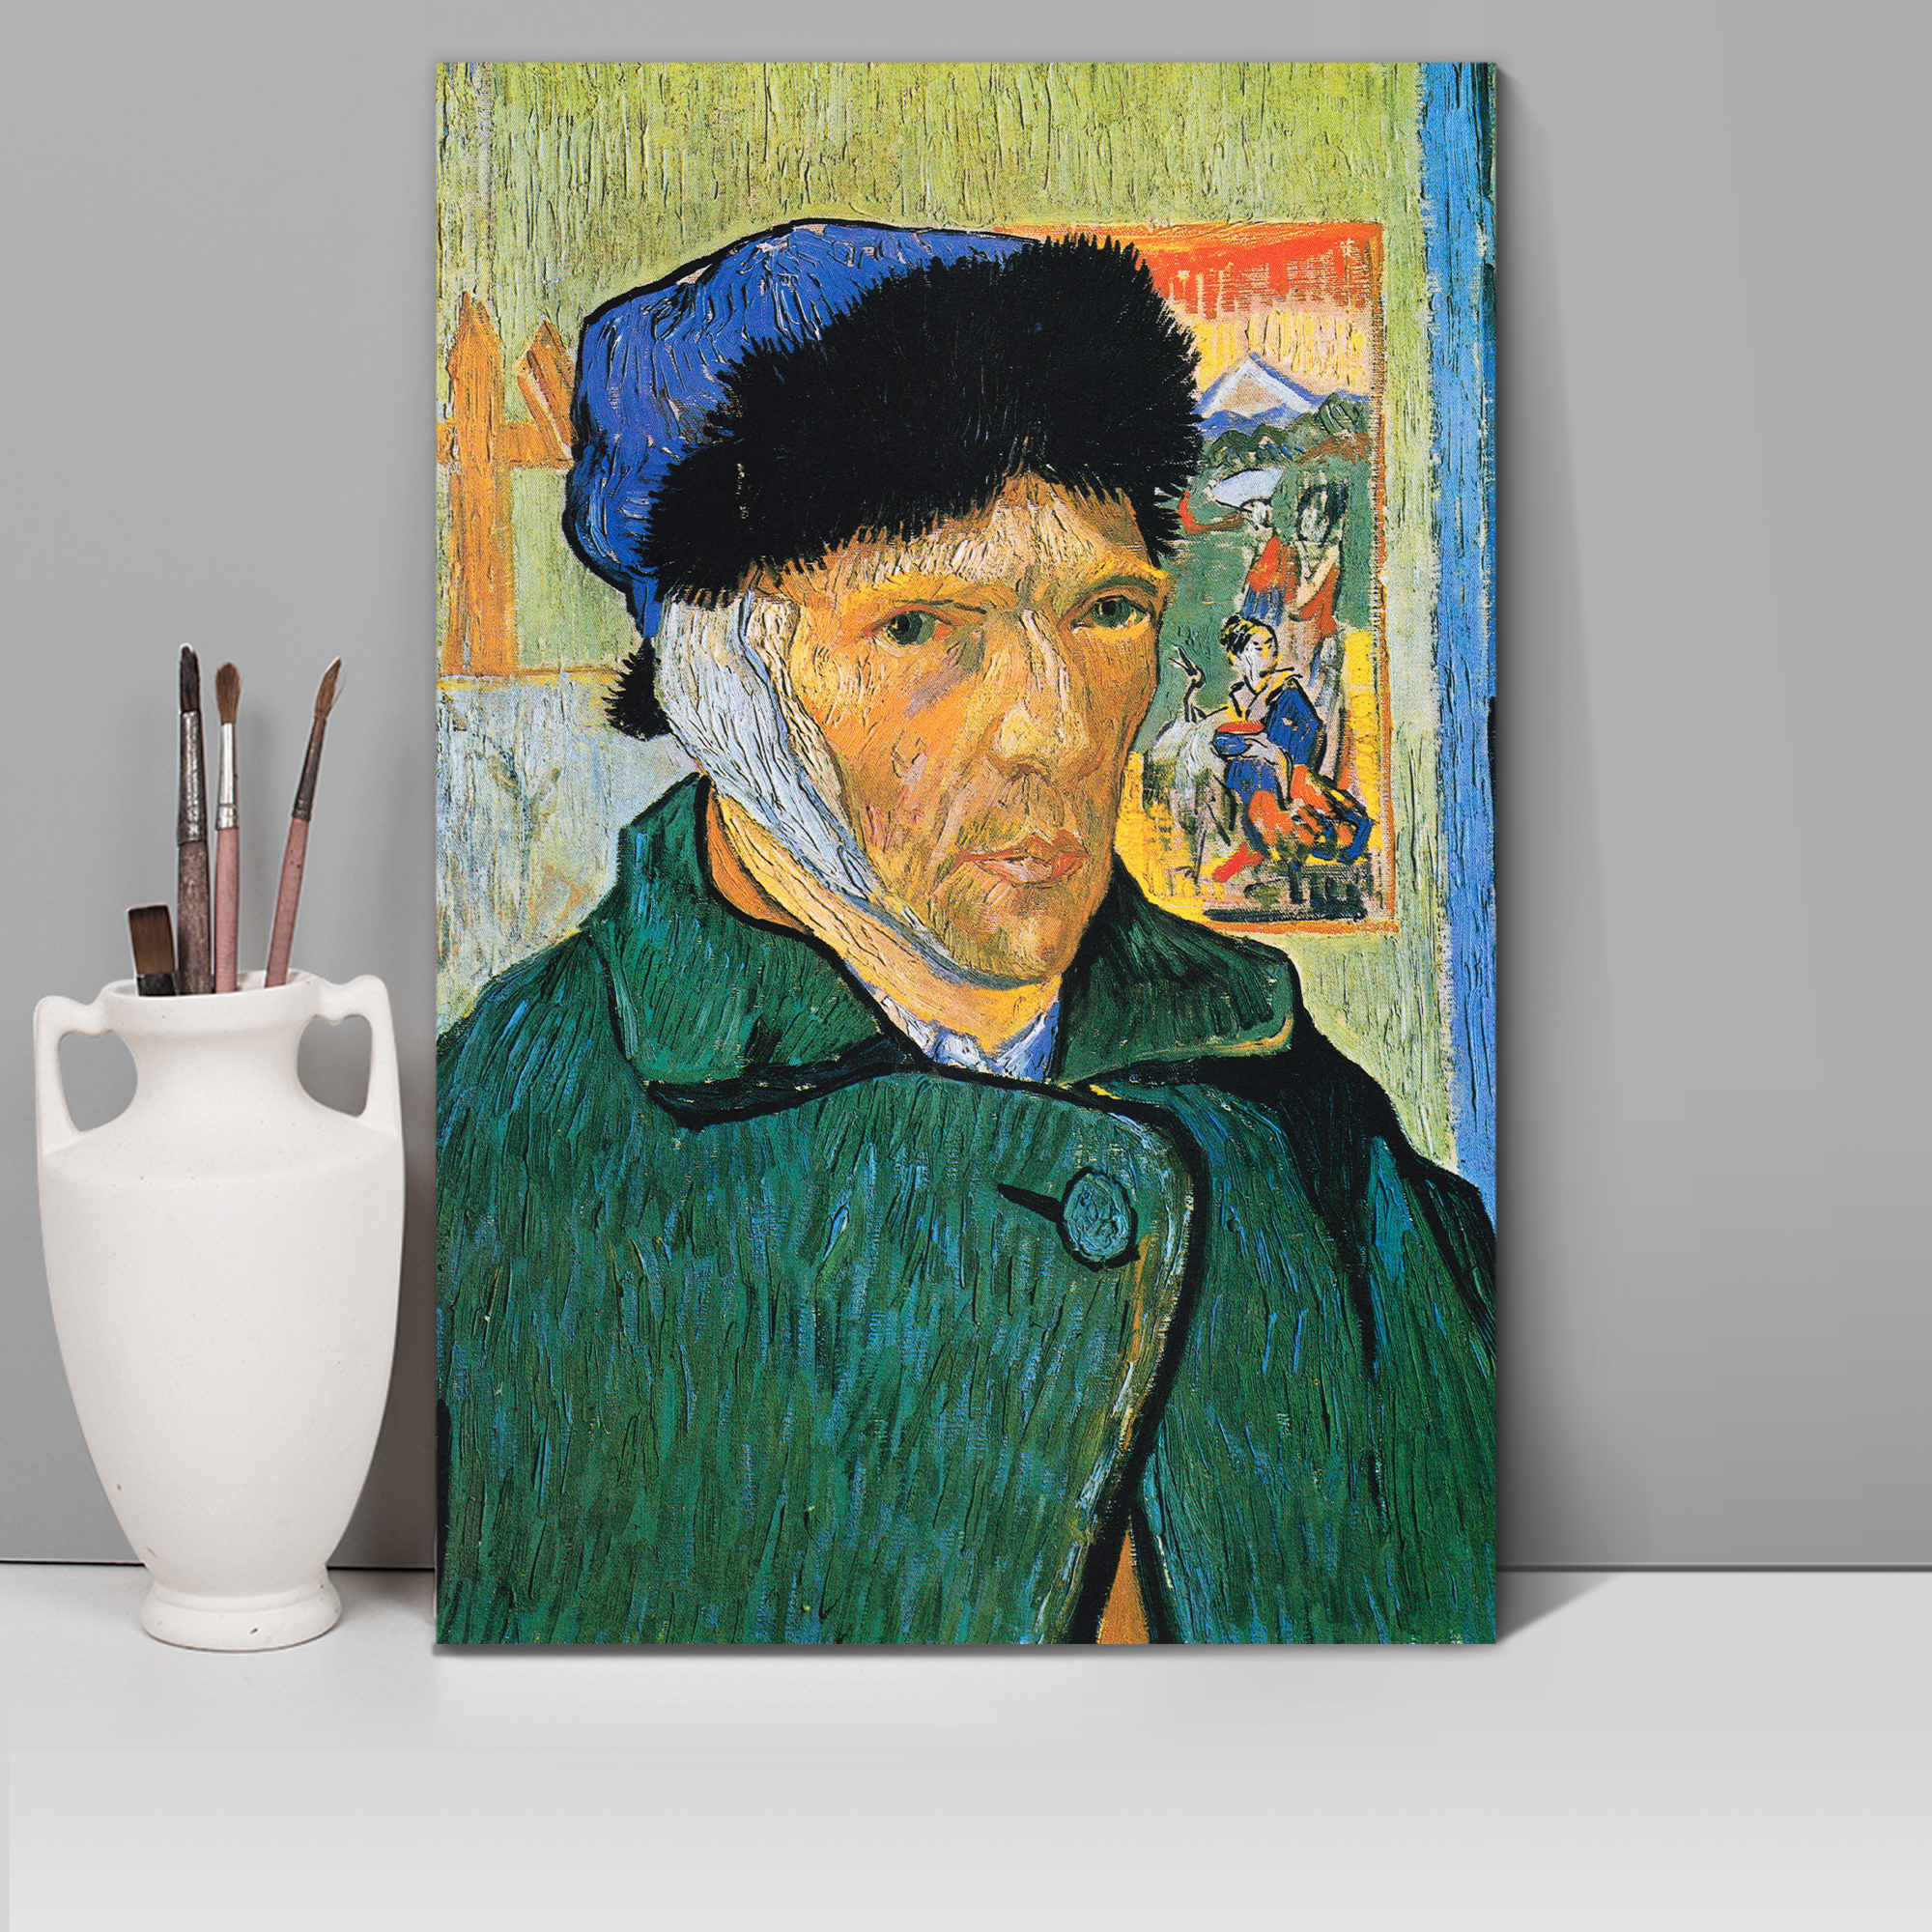 Portrait with Bandaged Ear by Vincent Van Gogh - Oil Painting Reproduction on Canvas Prints Wall Art, Ready to Hang - 24